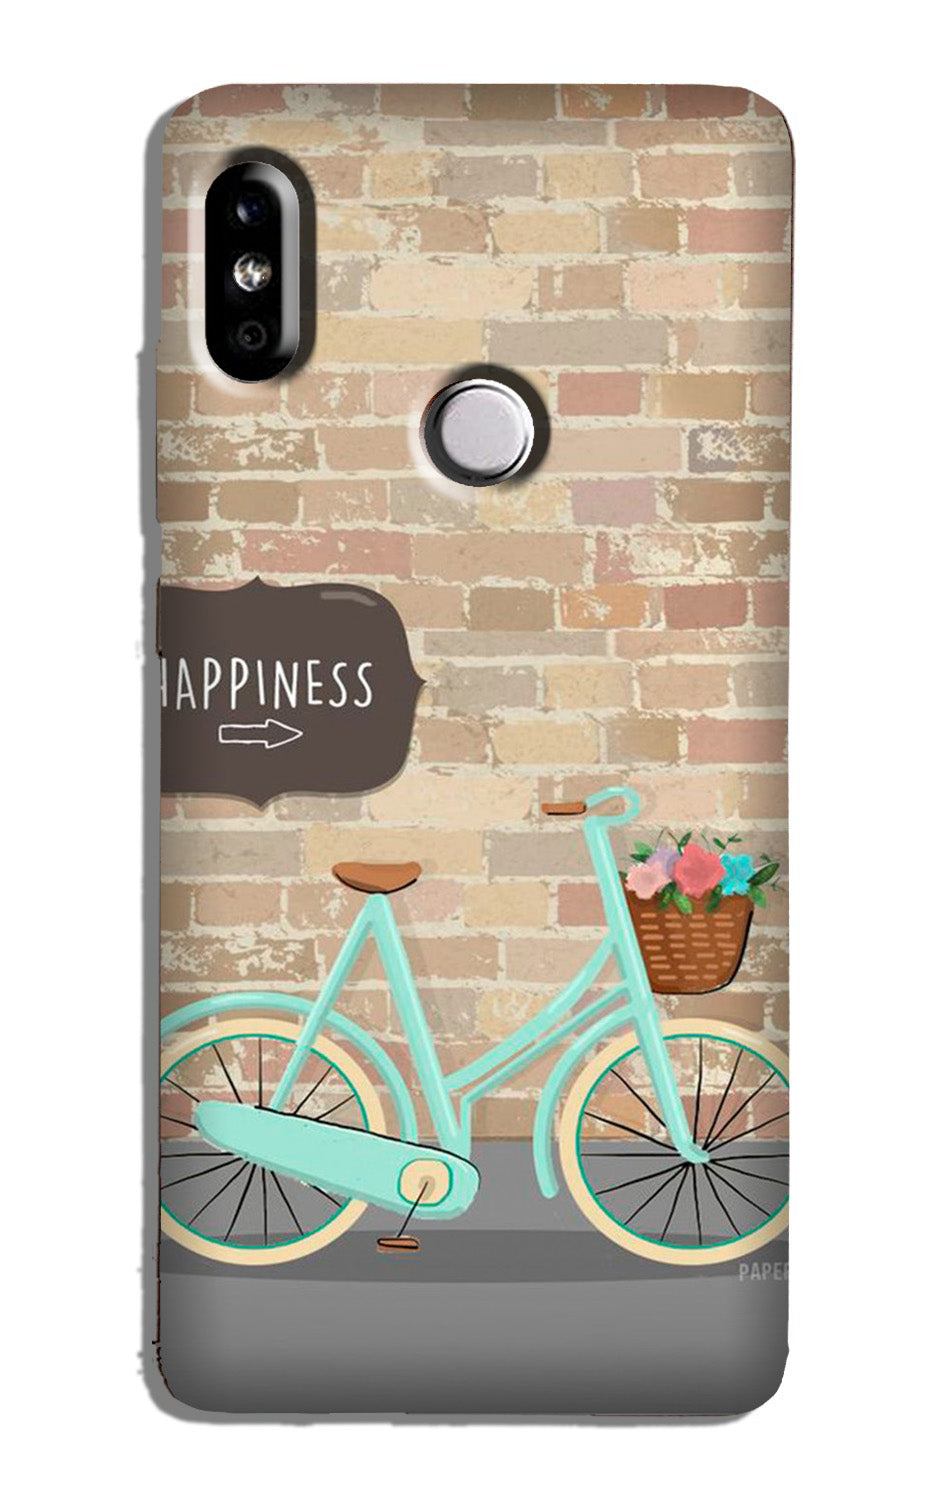 Happiness Case for Redmi Note 6 Pro